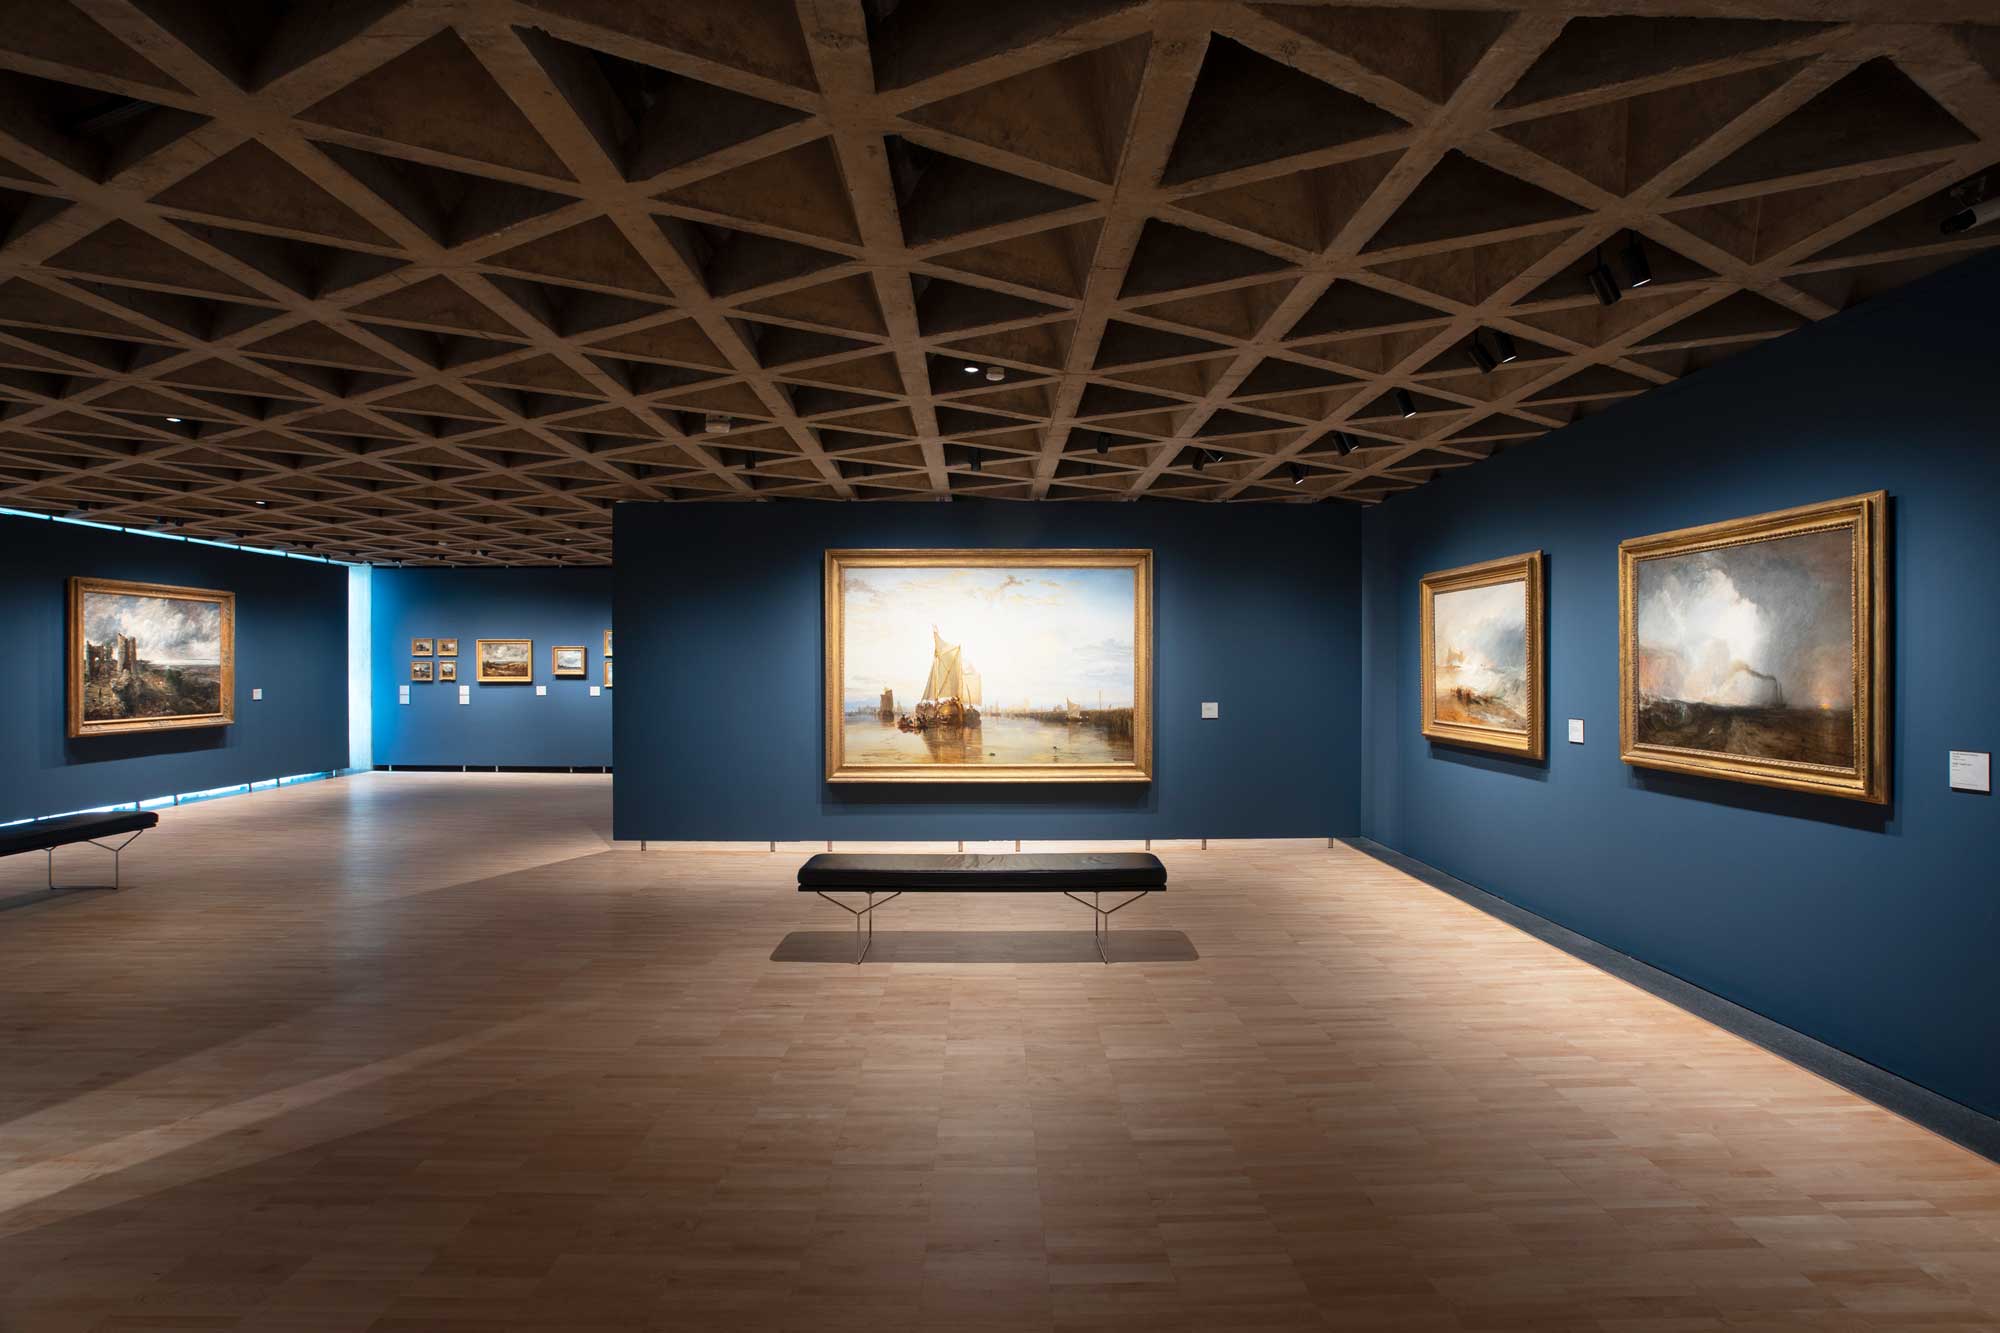 installation view of paintings inside a room painted a deep blue